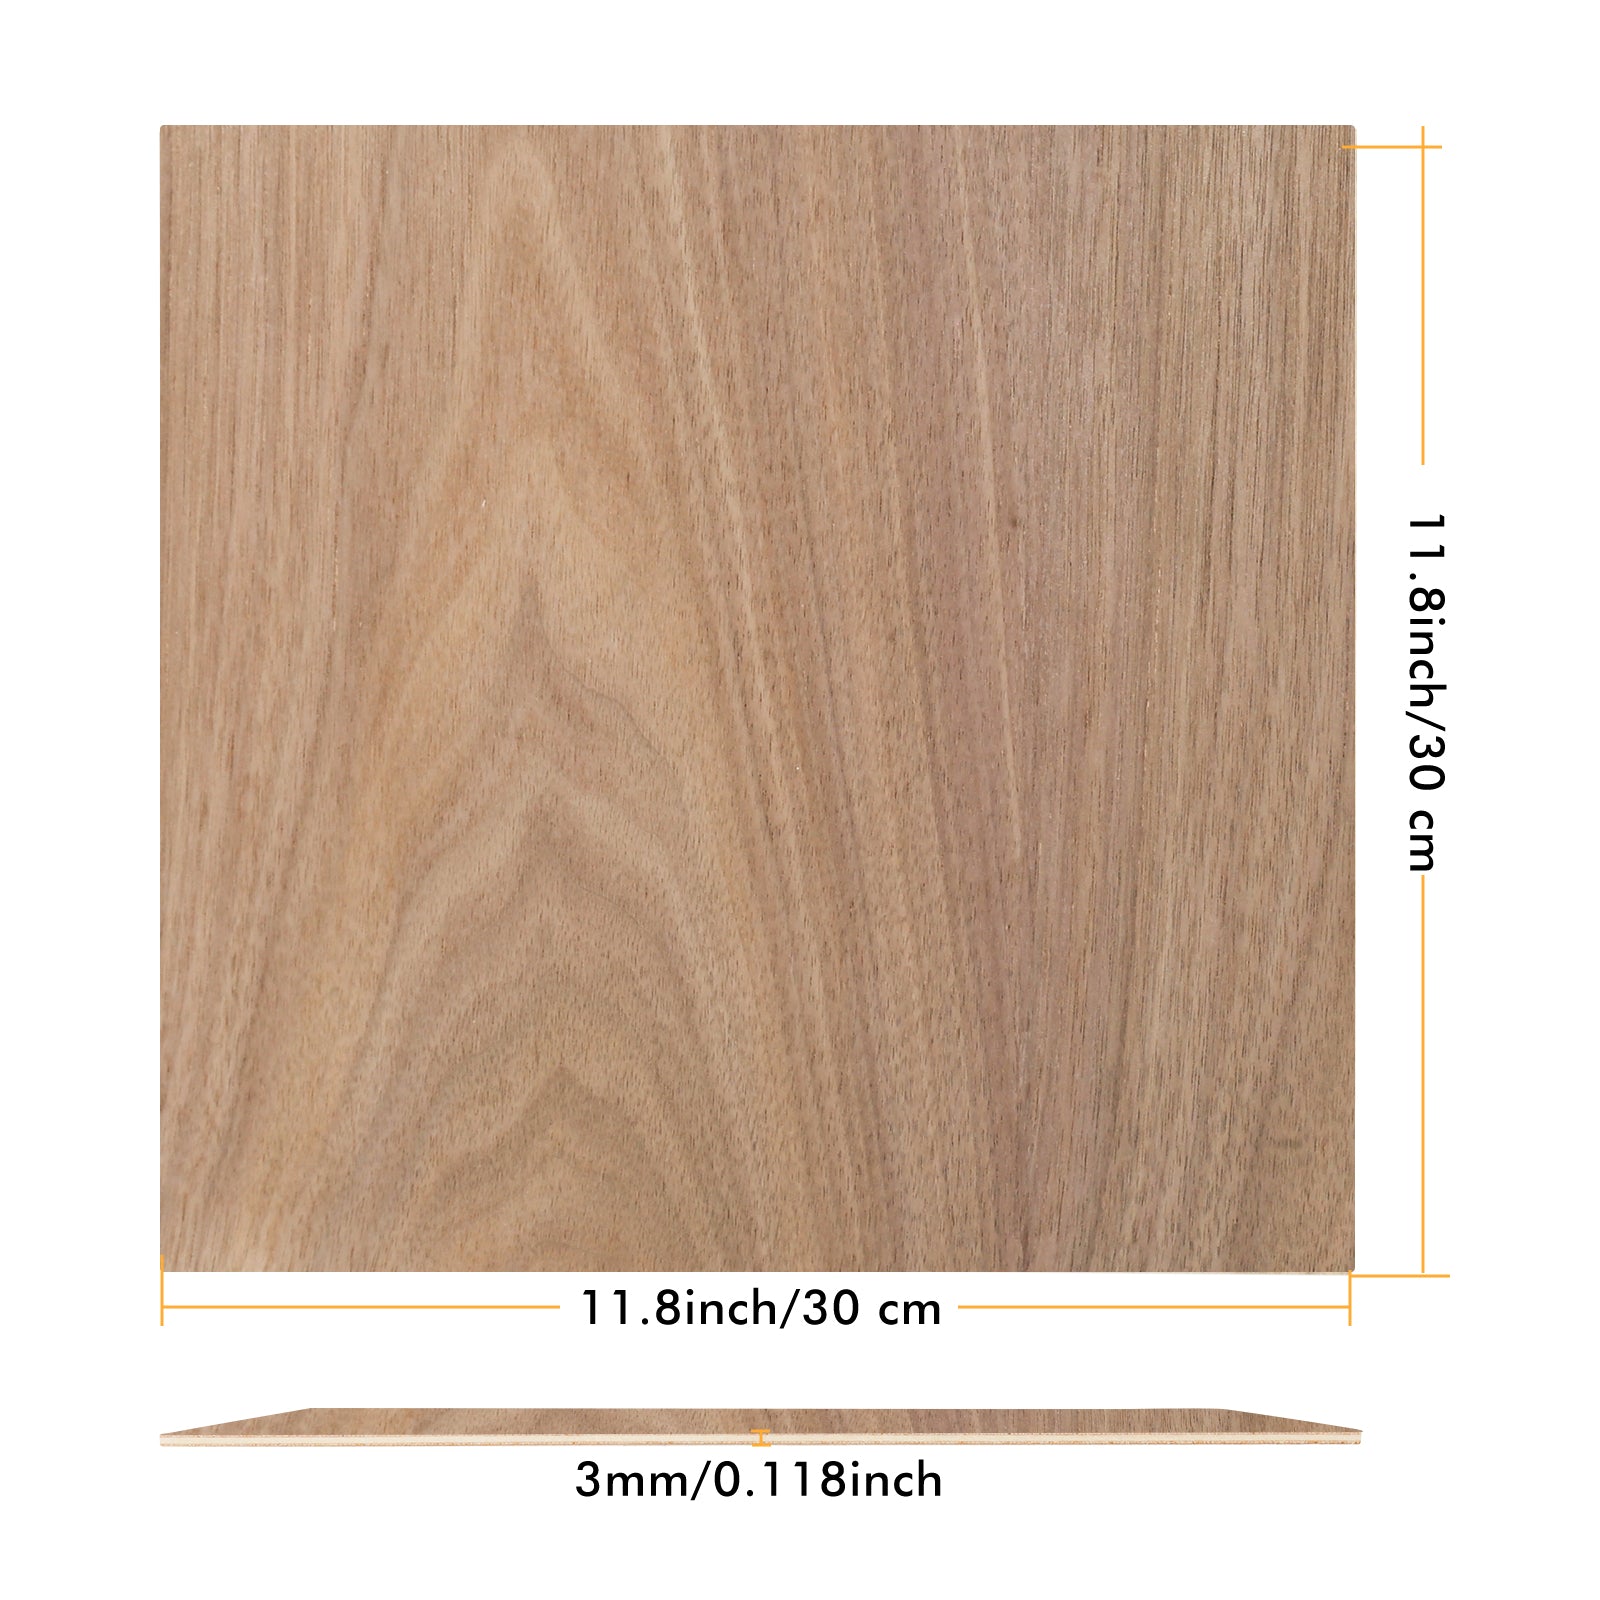 6pcs Black Walnut Plywood 12 x 12 Unfinished Wood for Crafts Laser Engraving CNC Cutting